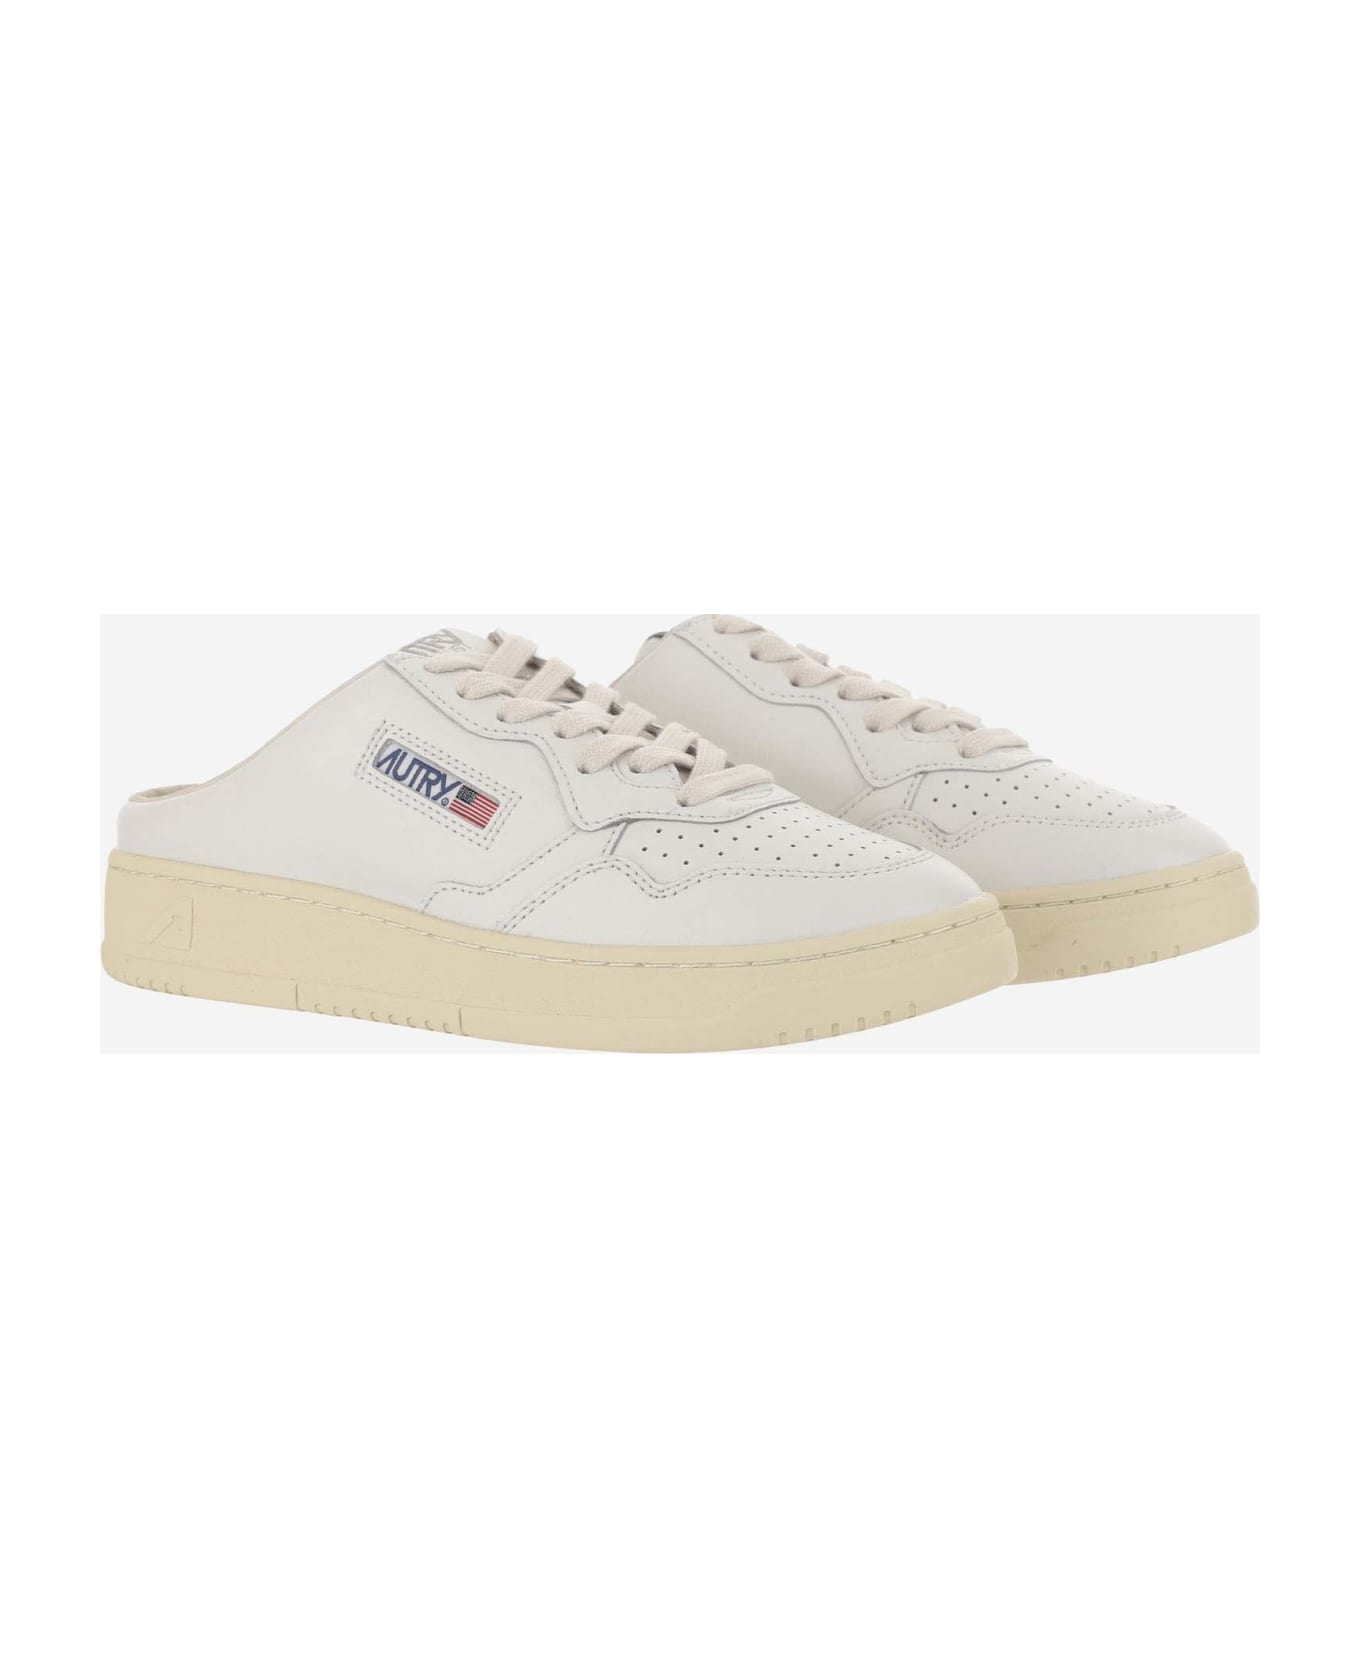 Autry Medalist Mule Low Leather Sneakers - Wht/wht スニーカー